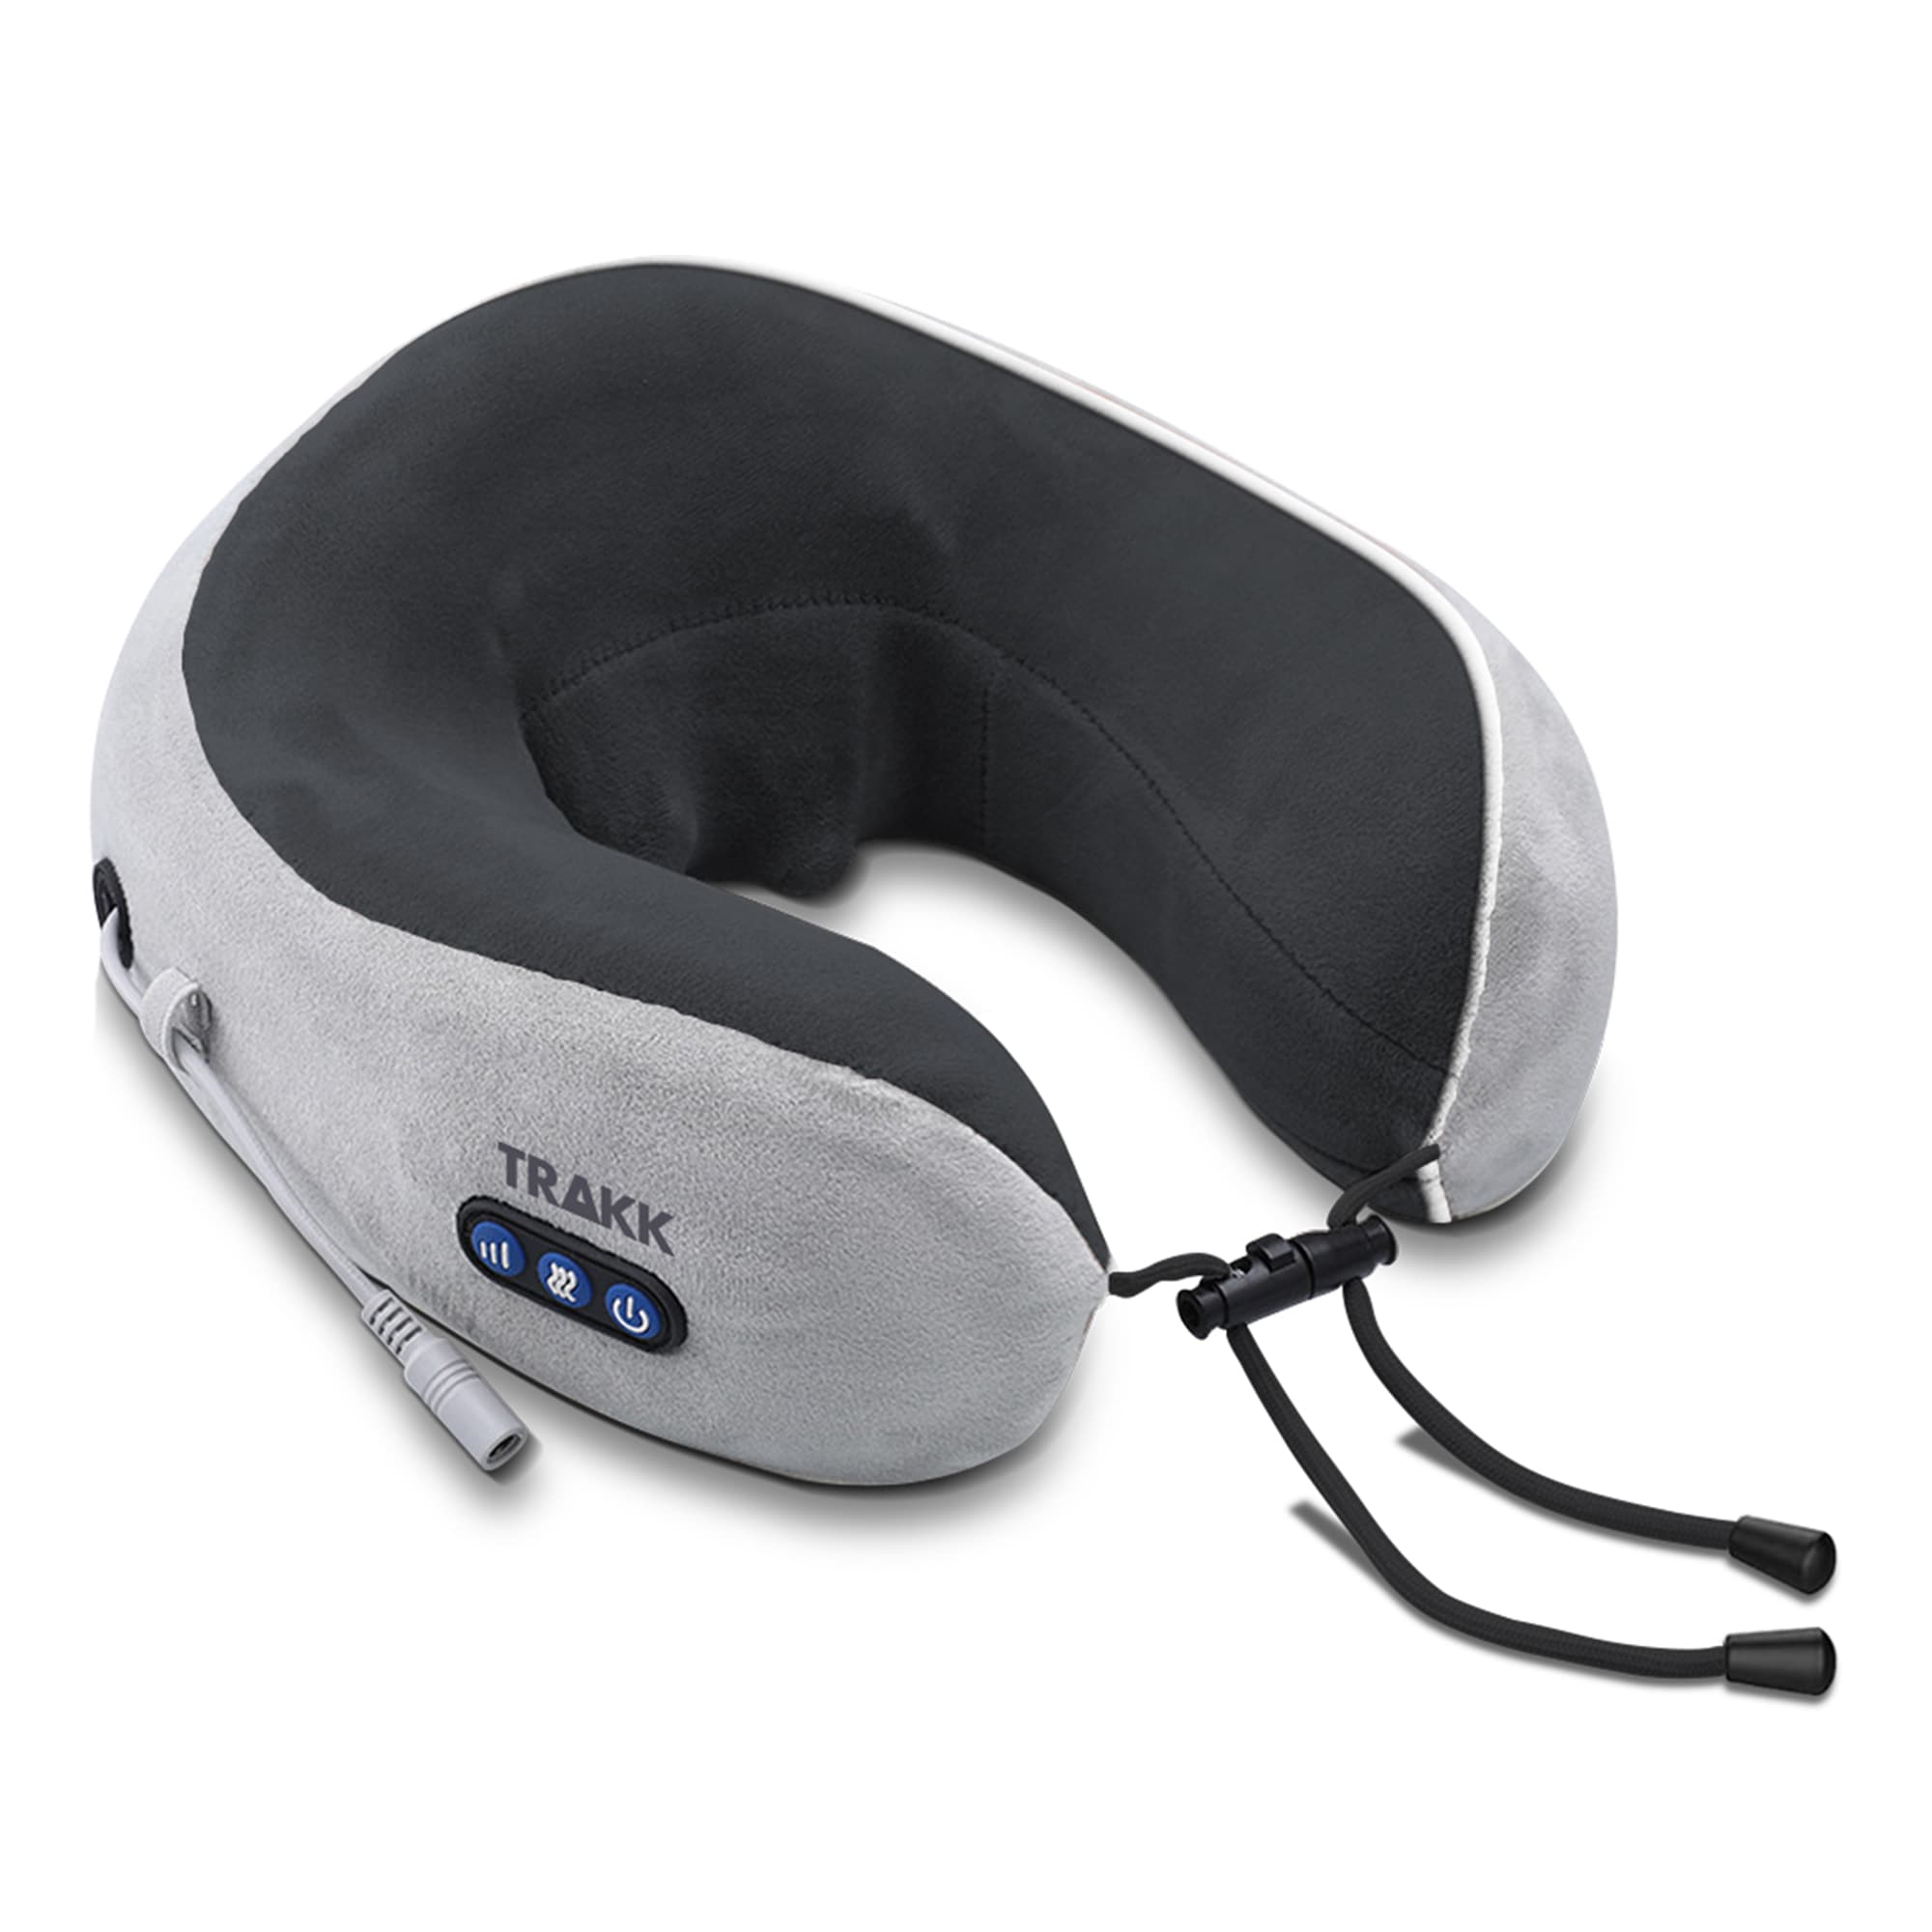 Cordless and Portable Neck Massager: On-The-Go Relaxation - White